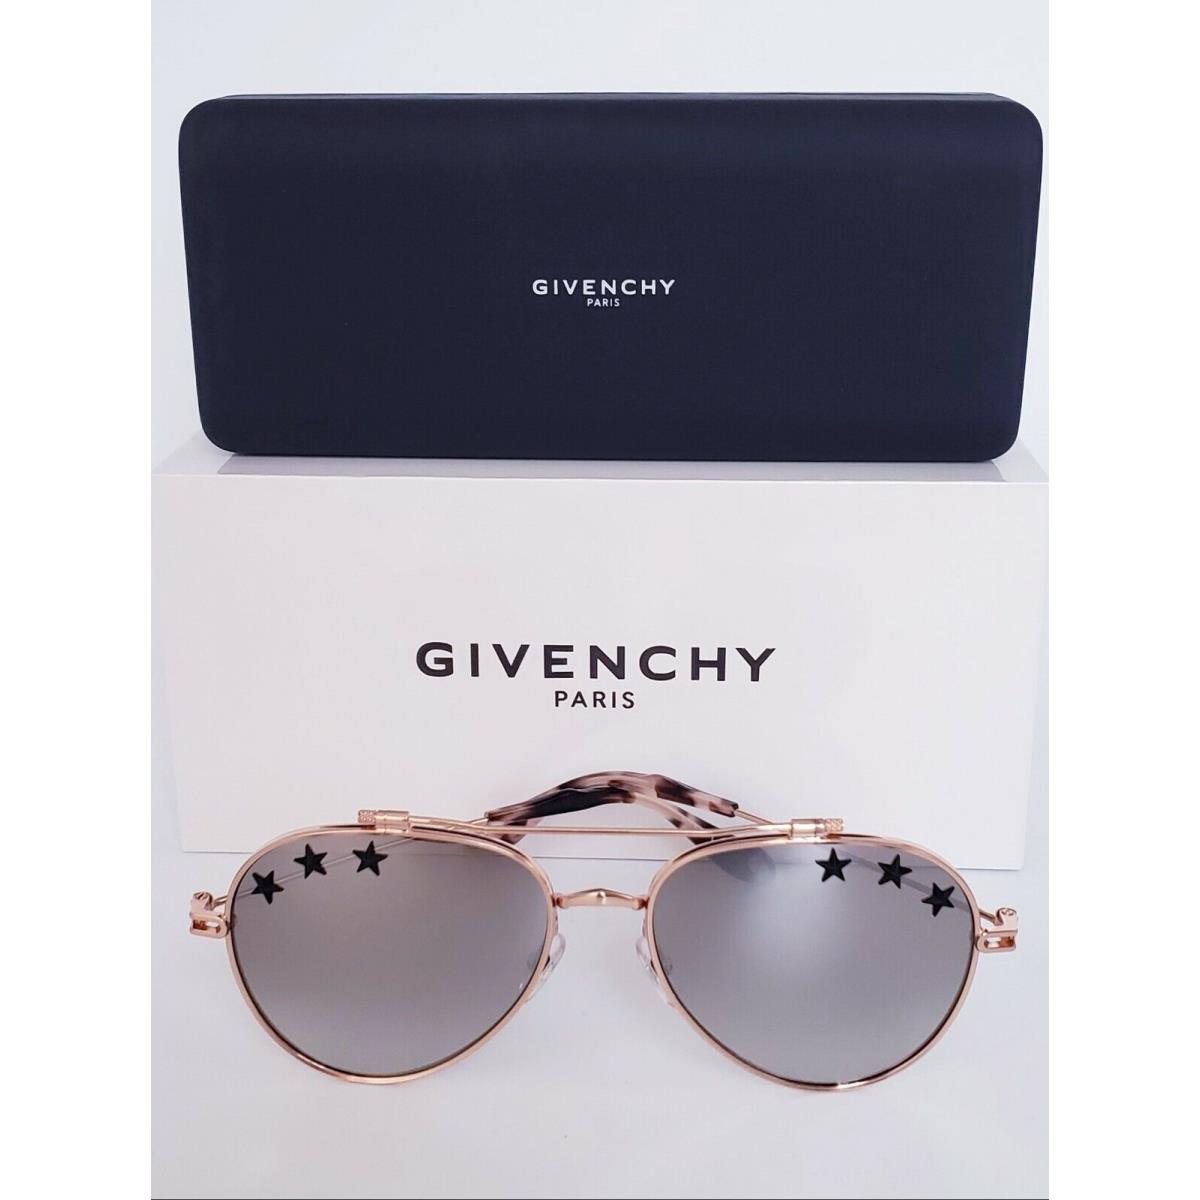 Givenchy sunglasses Star - Frame: Gold, Lens: Brown grey Gradient with Silver mirror effect 4